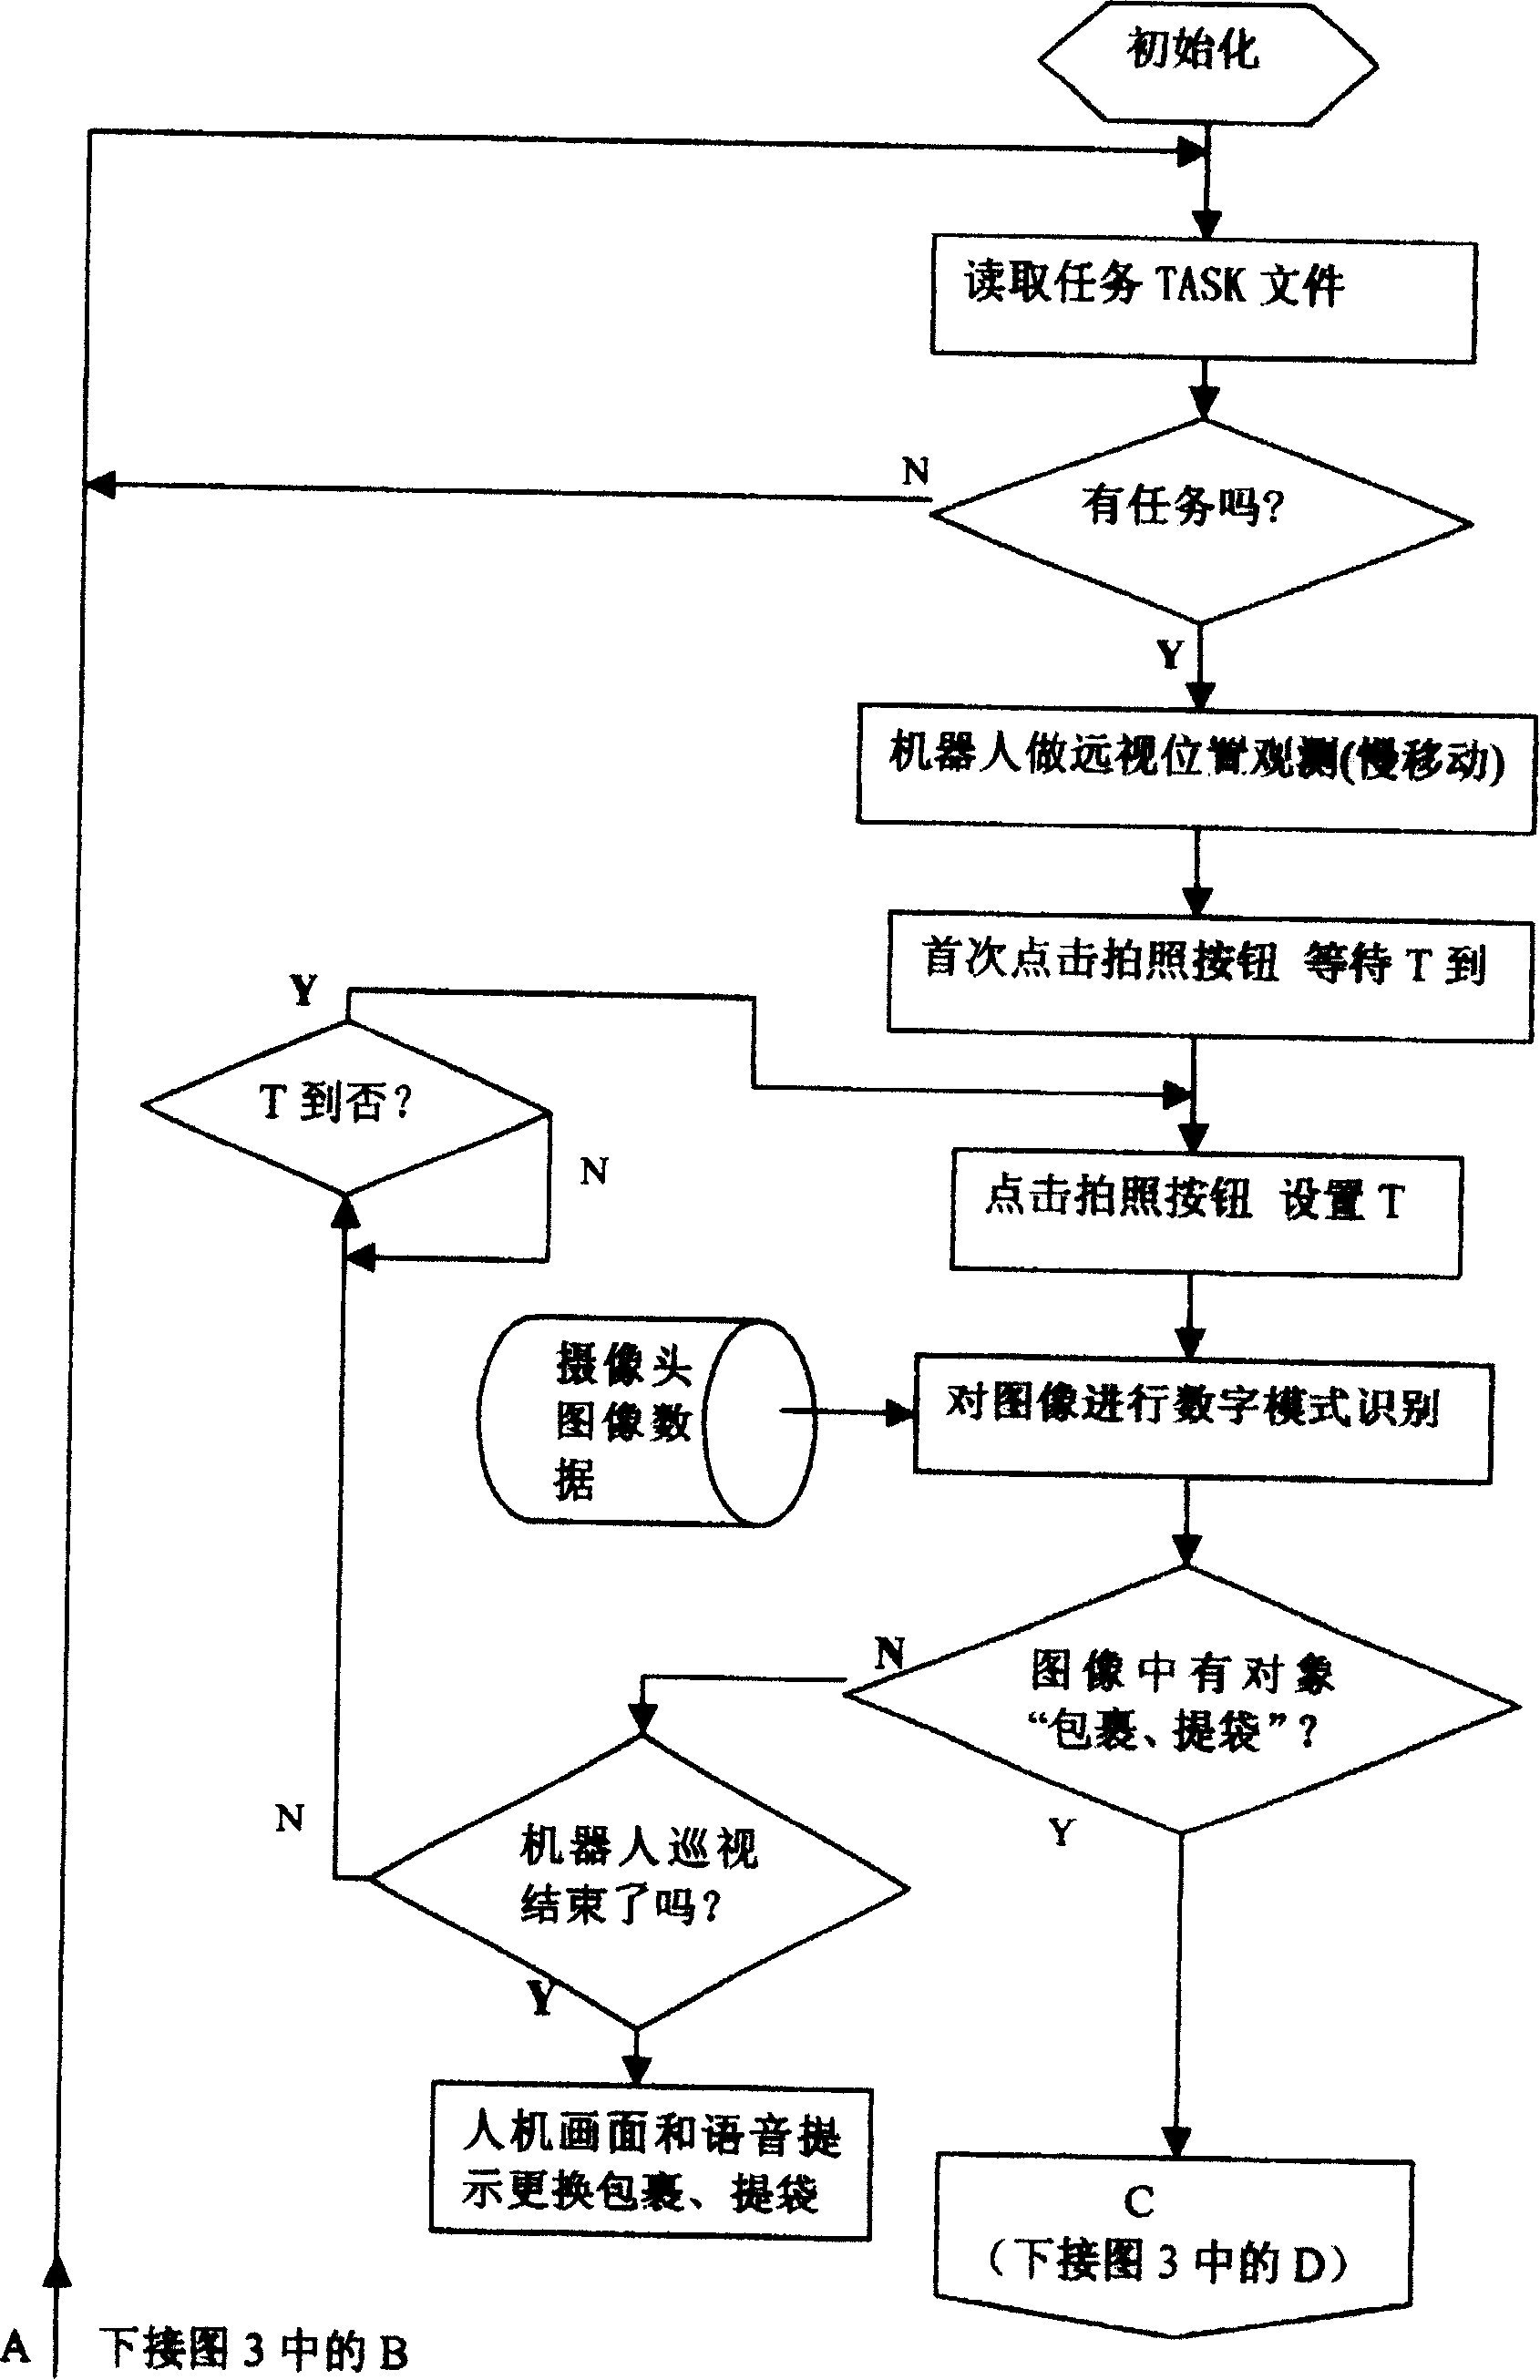 Equipment and method of industrial robot possessing ability of recognizing color image